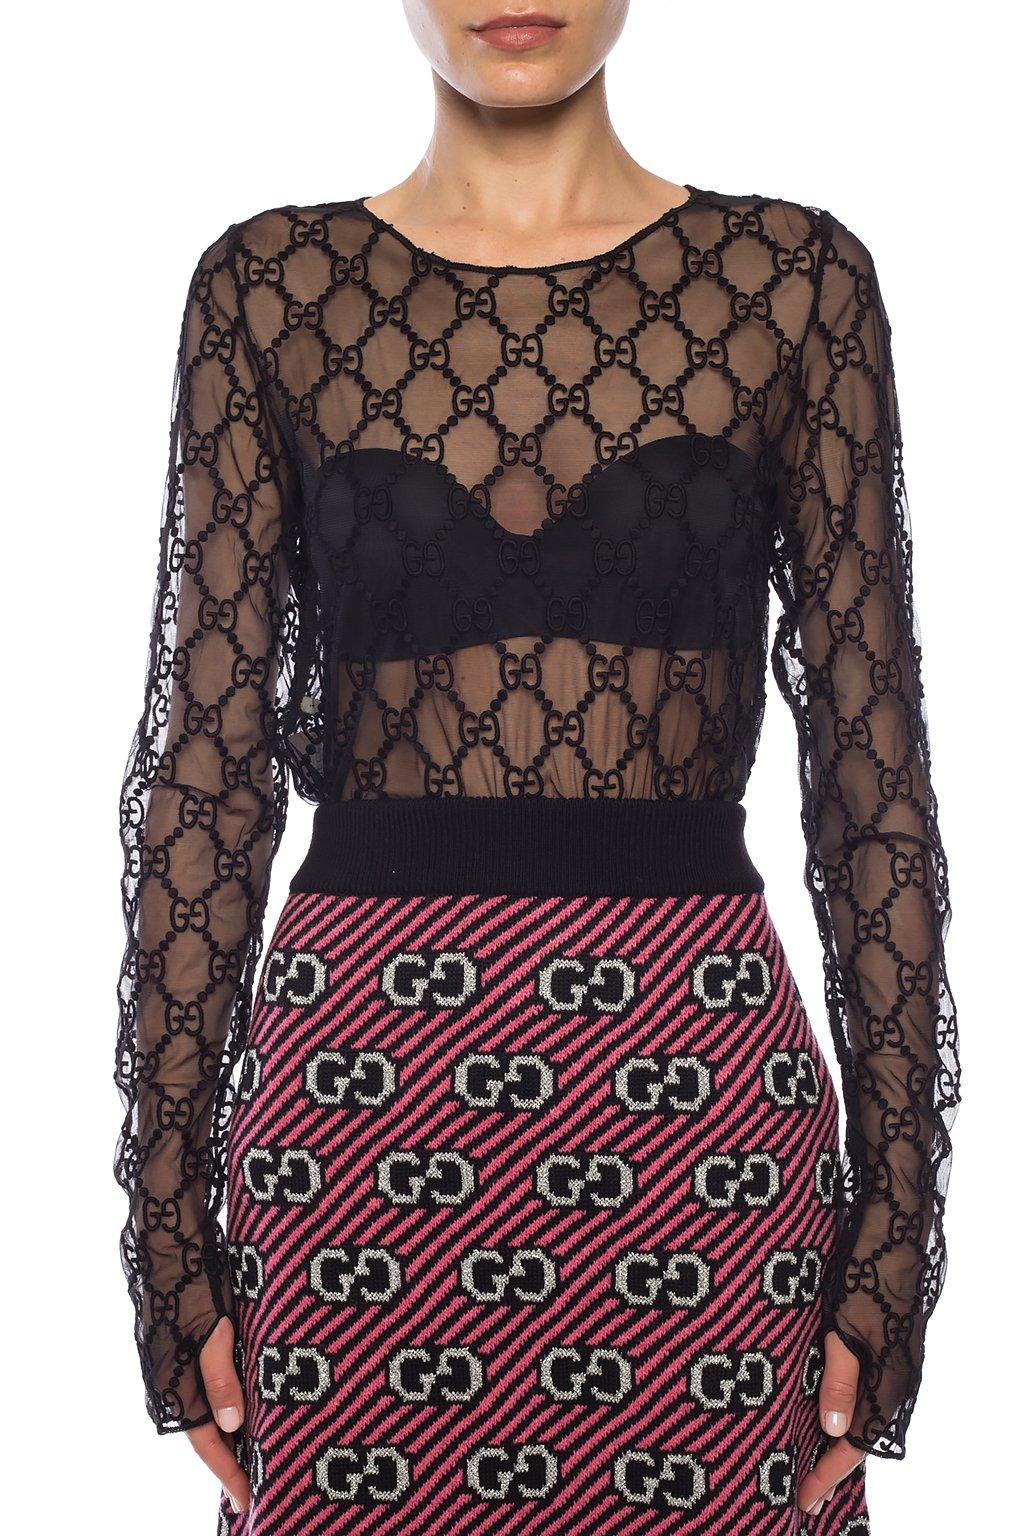 Gucci Patterned Sheer Top | Lyst